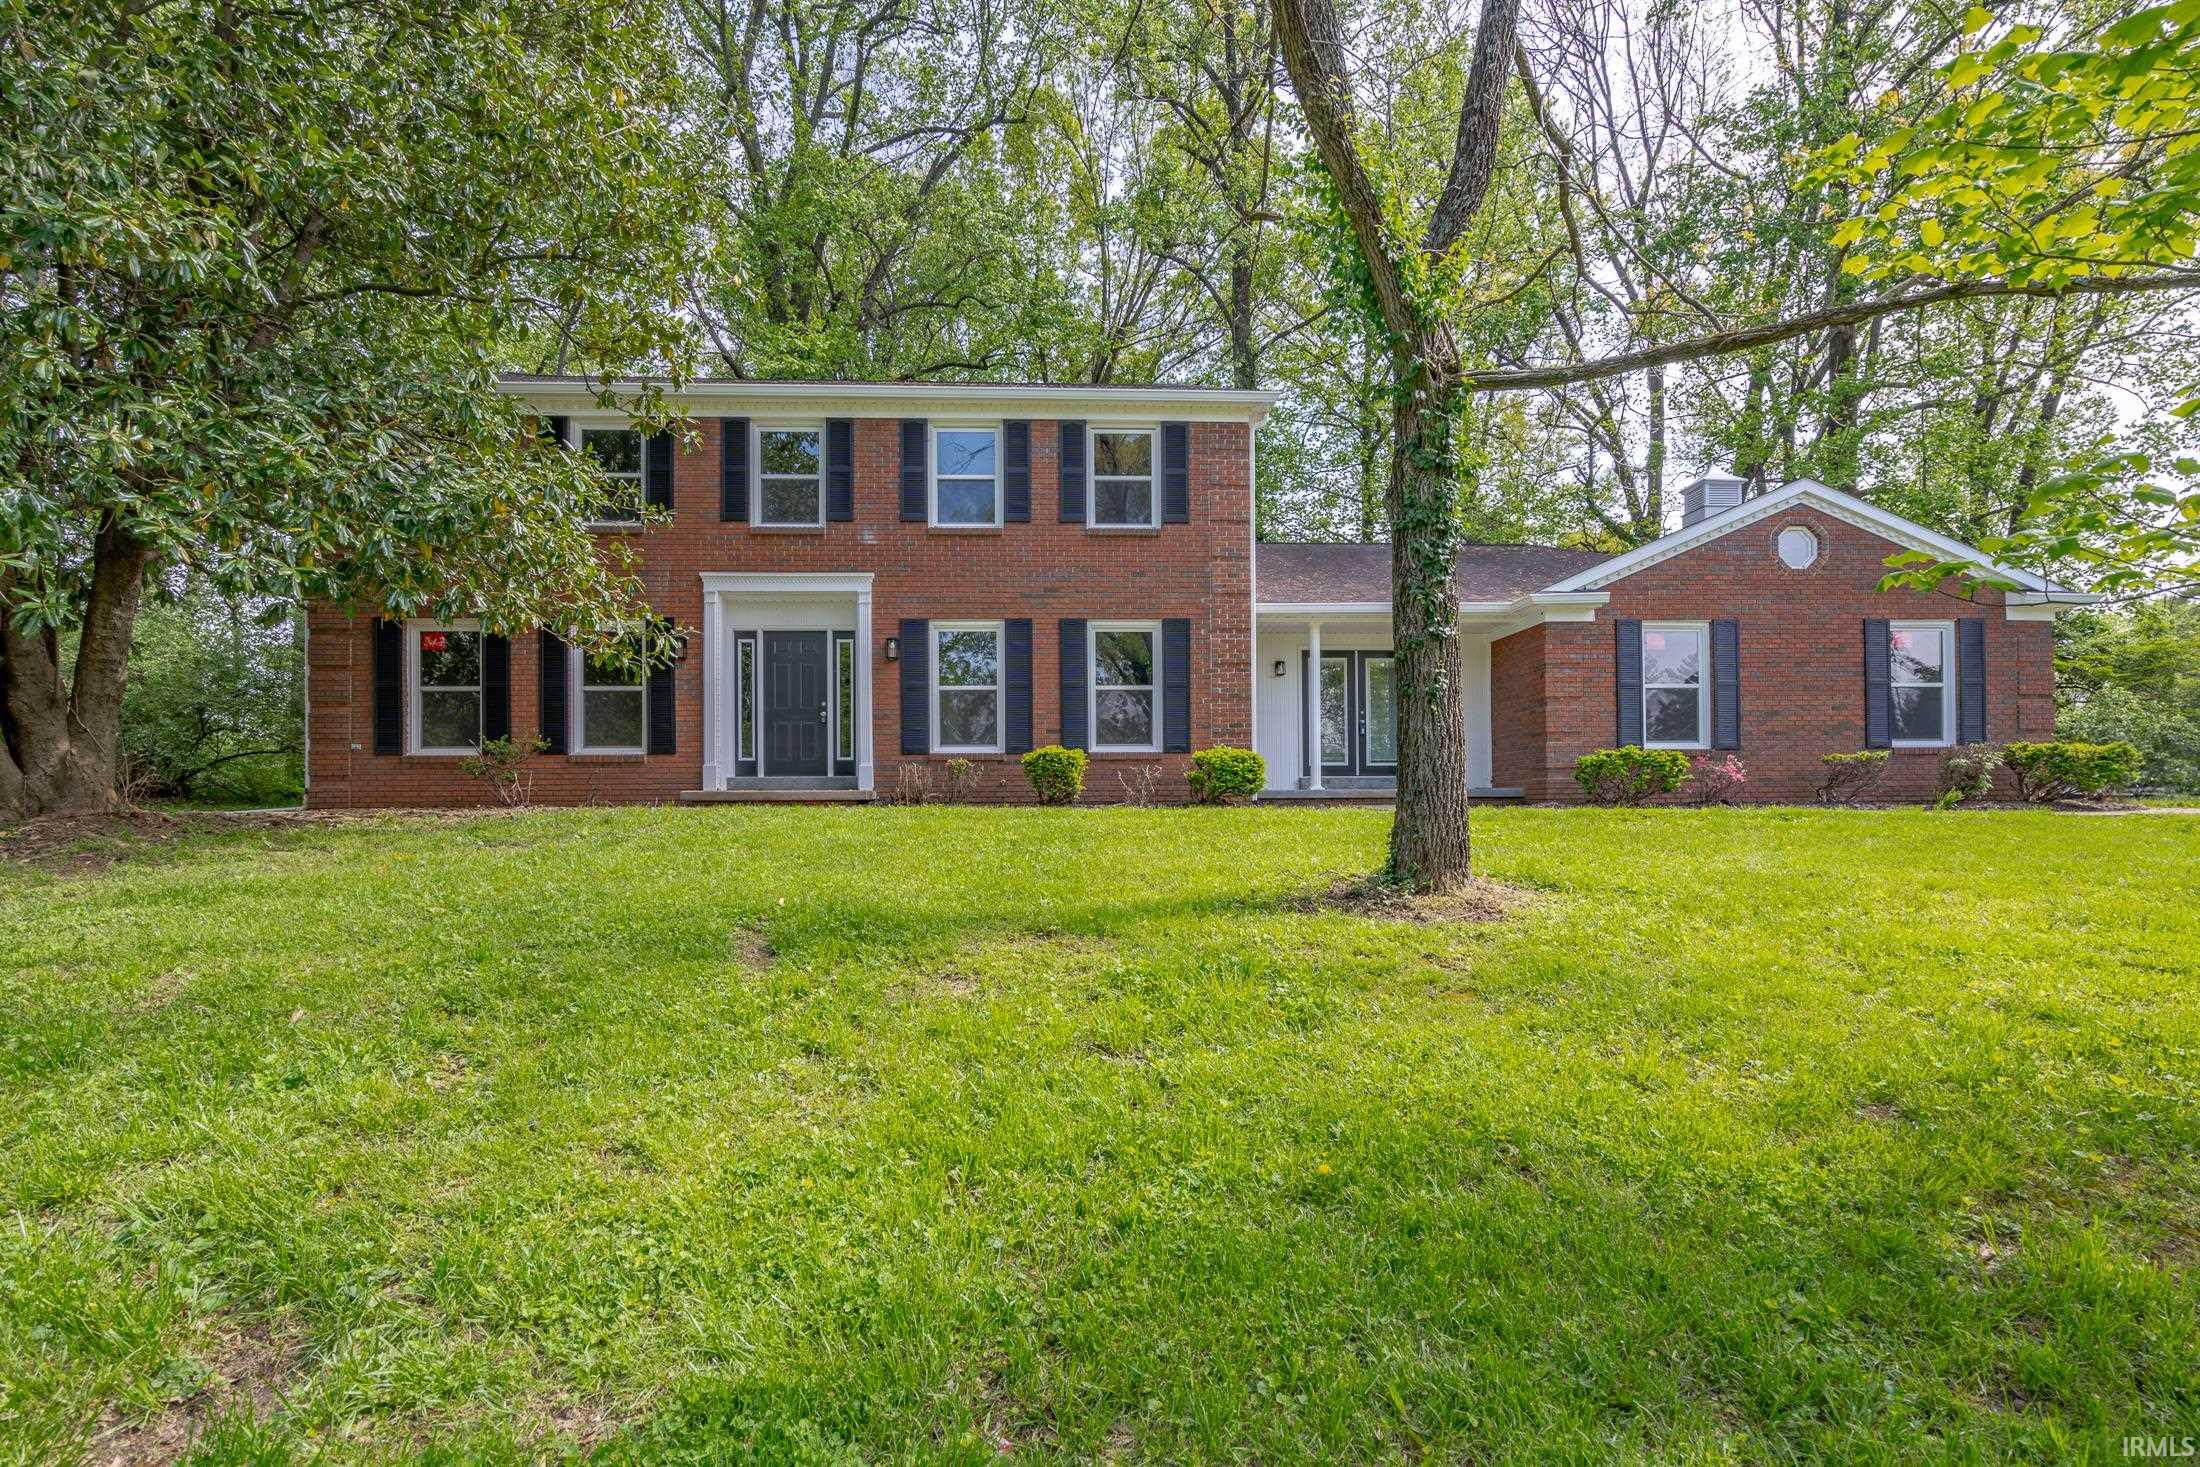 1011 E Boonville New Harmony Road, Evansville, IN 